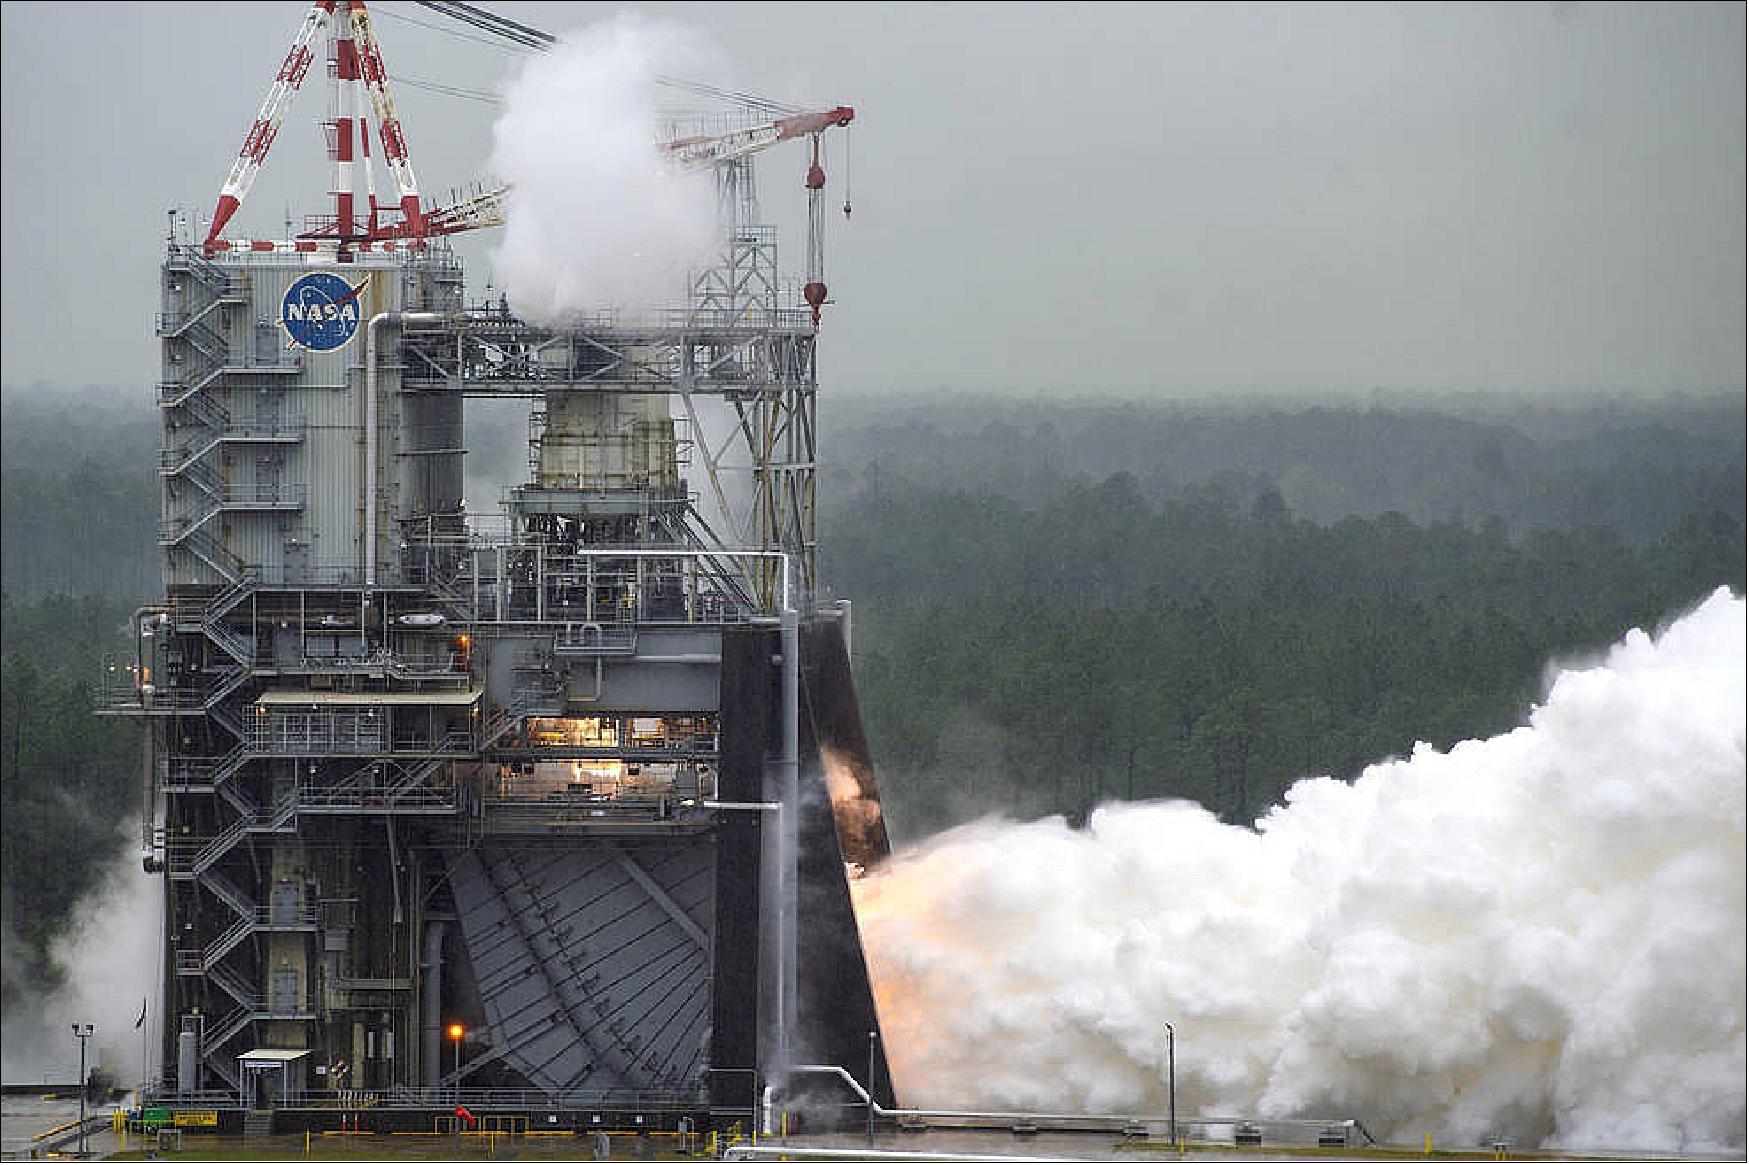 Figure 38: NASA conducts a test of RS-25 flight engine No. 2062 on April 4 on the A-1 Test Stand at Stennis Space Center near Bay St. Louis, Miss. The test marked a major milestone in NASA’s march forward to Moon missions. All 16 RS-25 engines that will help power the first four flights of NASA’s new Space Launch System rocket now have been tested (image credit: NASA/SSC)